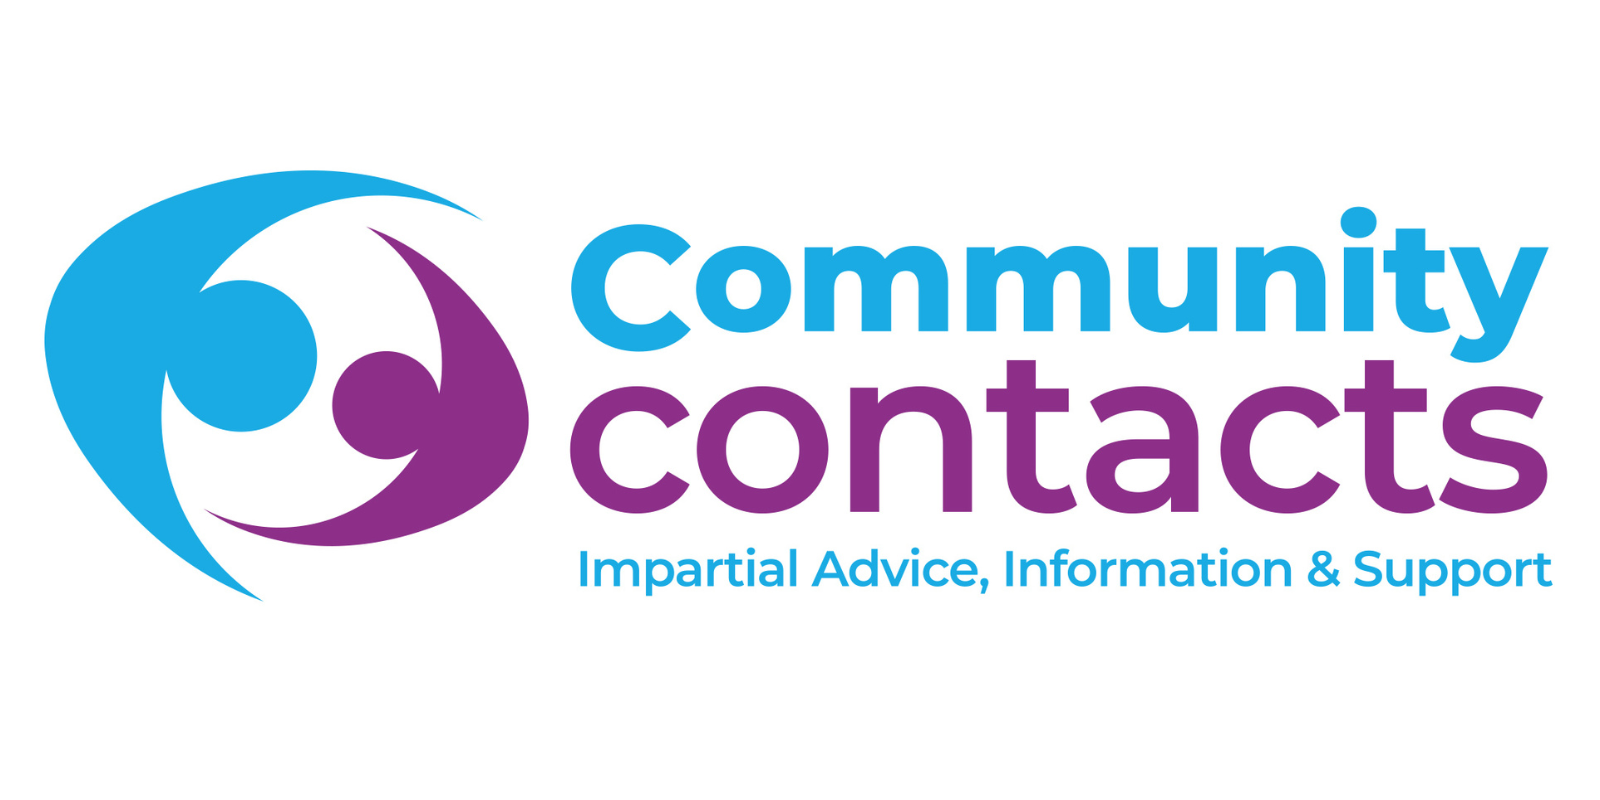 Community contacts